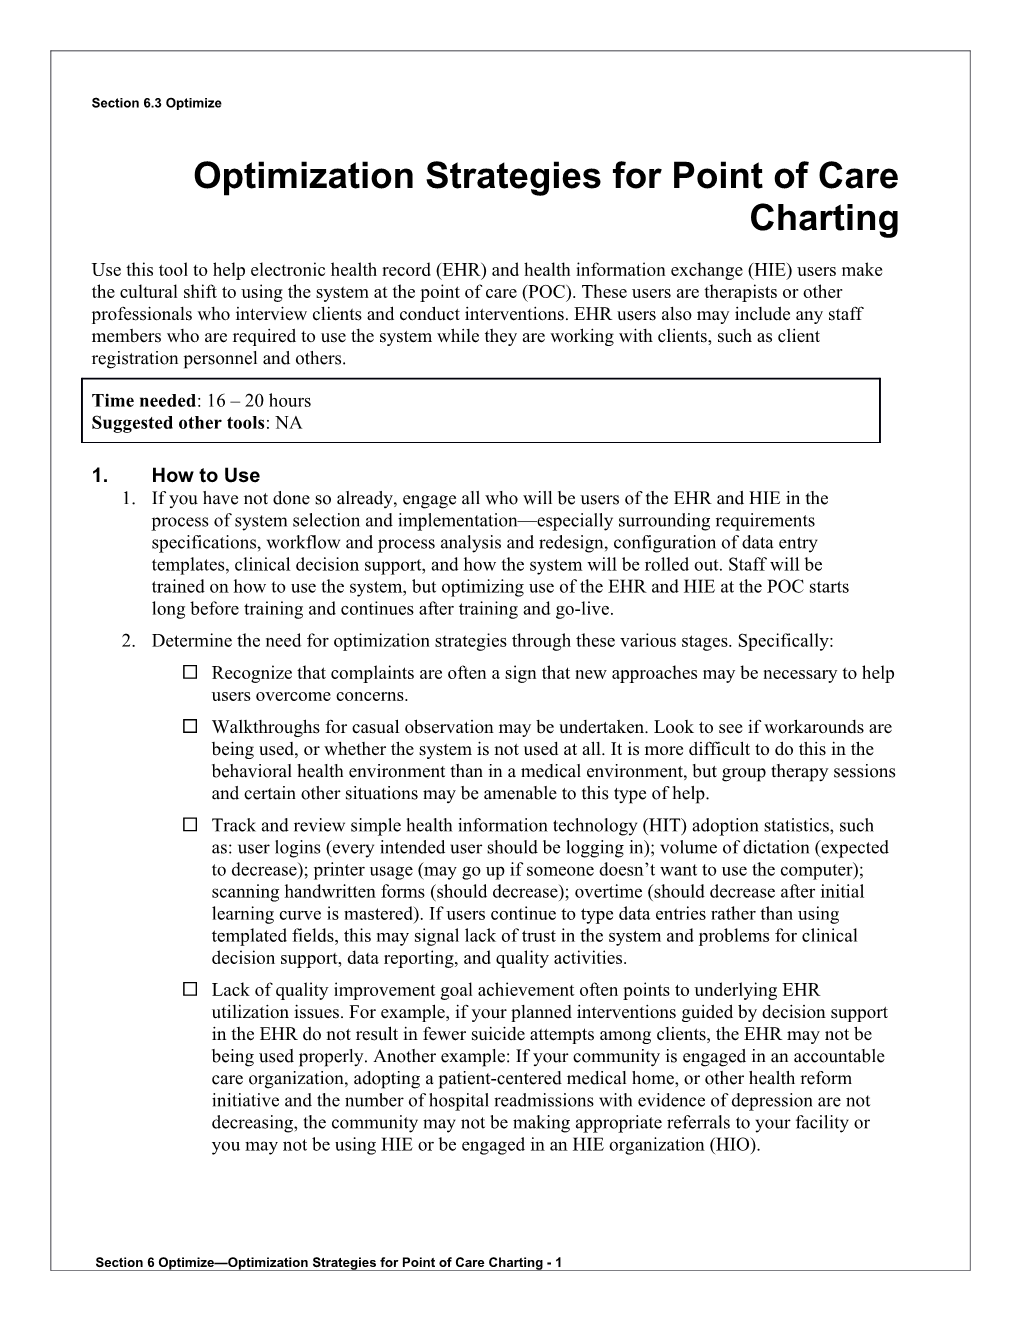 6 Optimization Strategies for Point of Care Charting